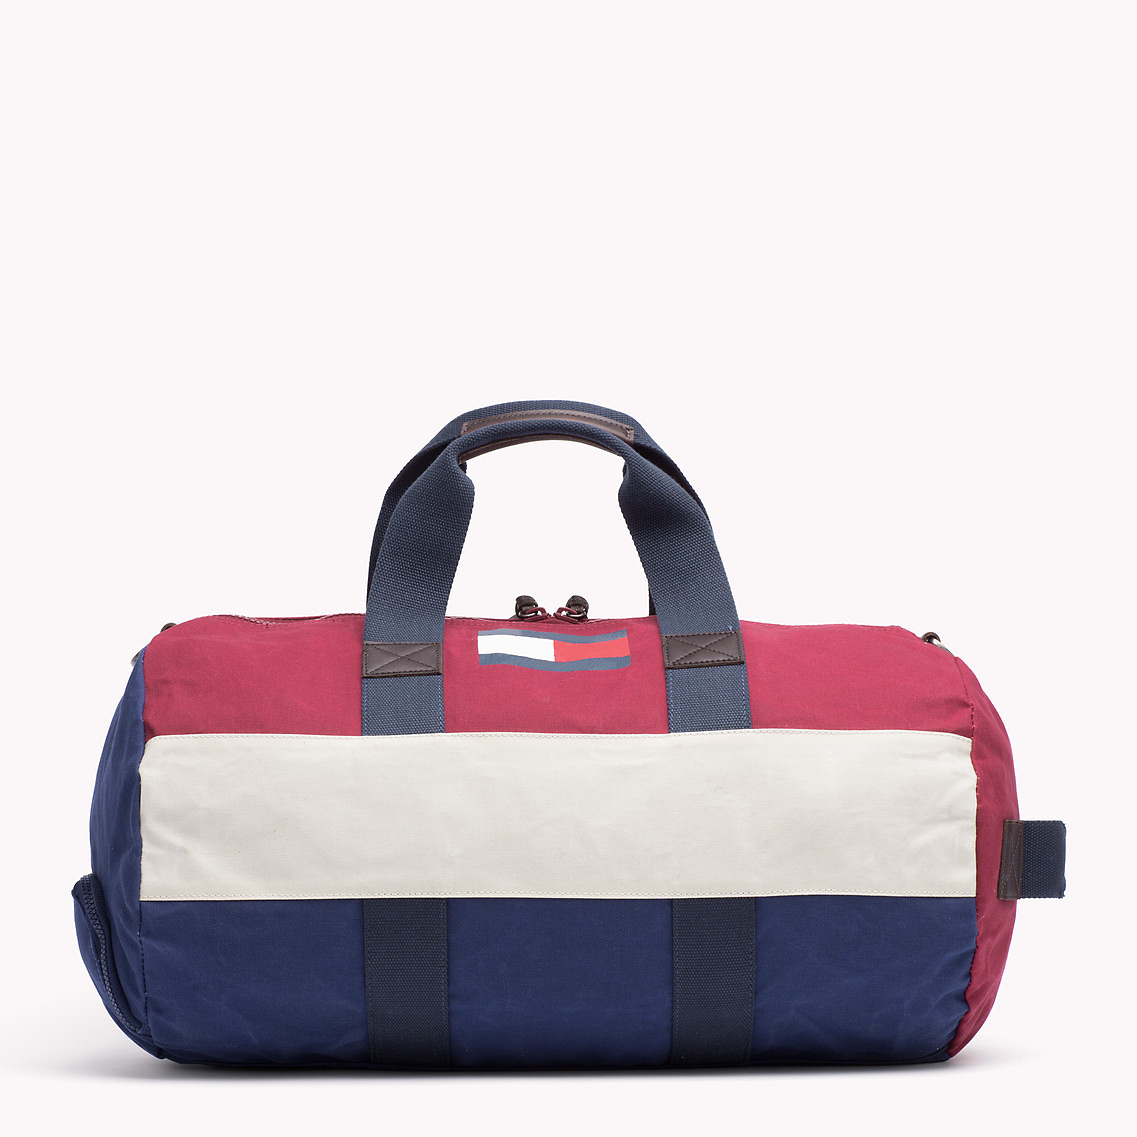 Tommy Hilfiger Lance Duffle Bag in Red for Men - Lyst